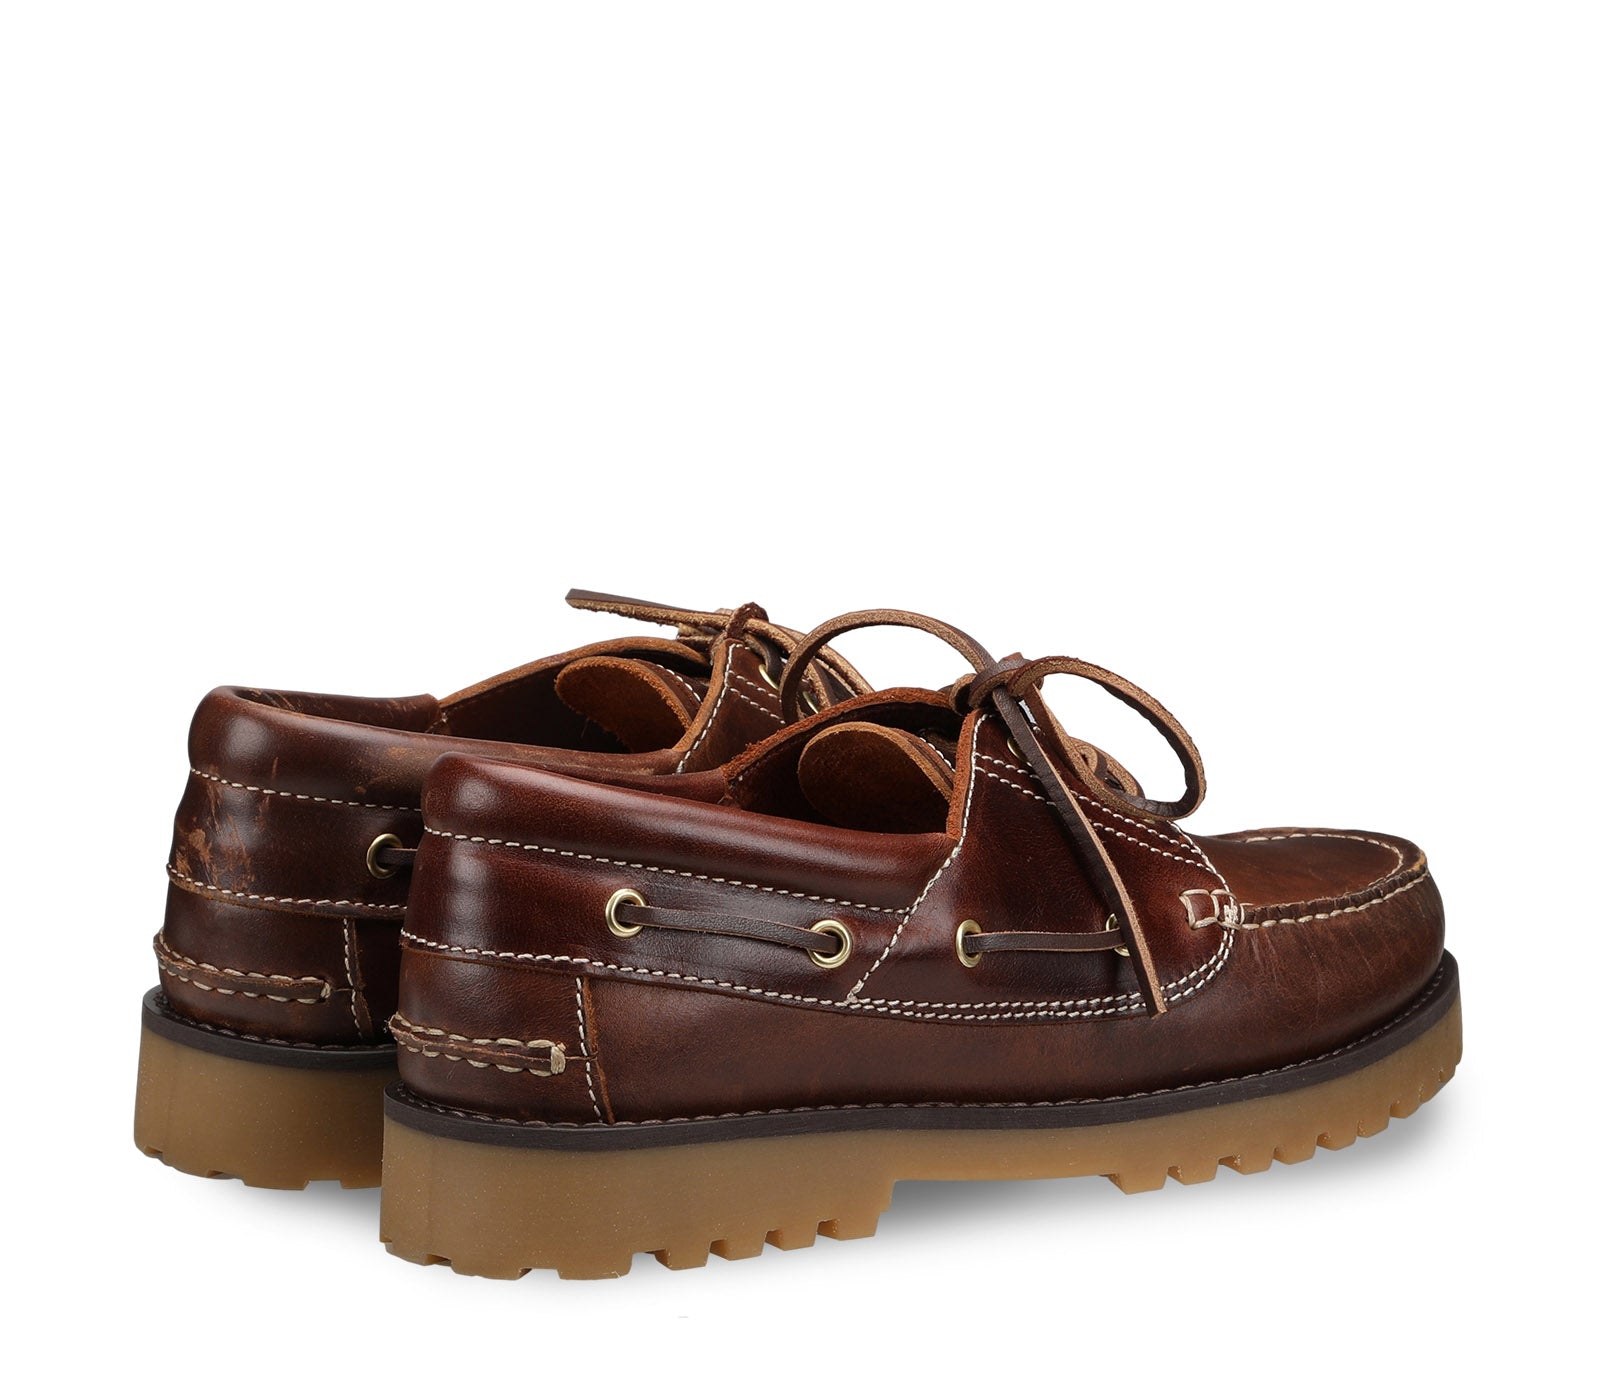 Brown Leather Men's Boat Shoes 